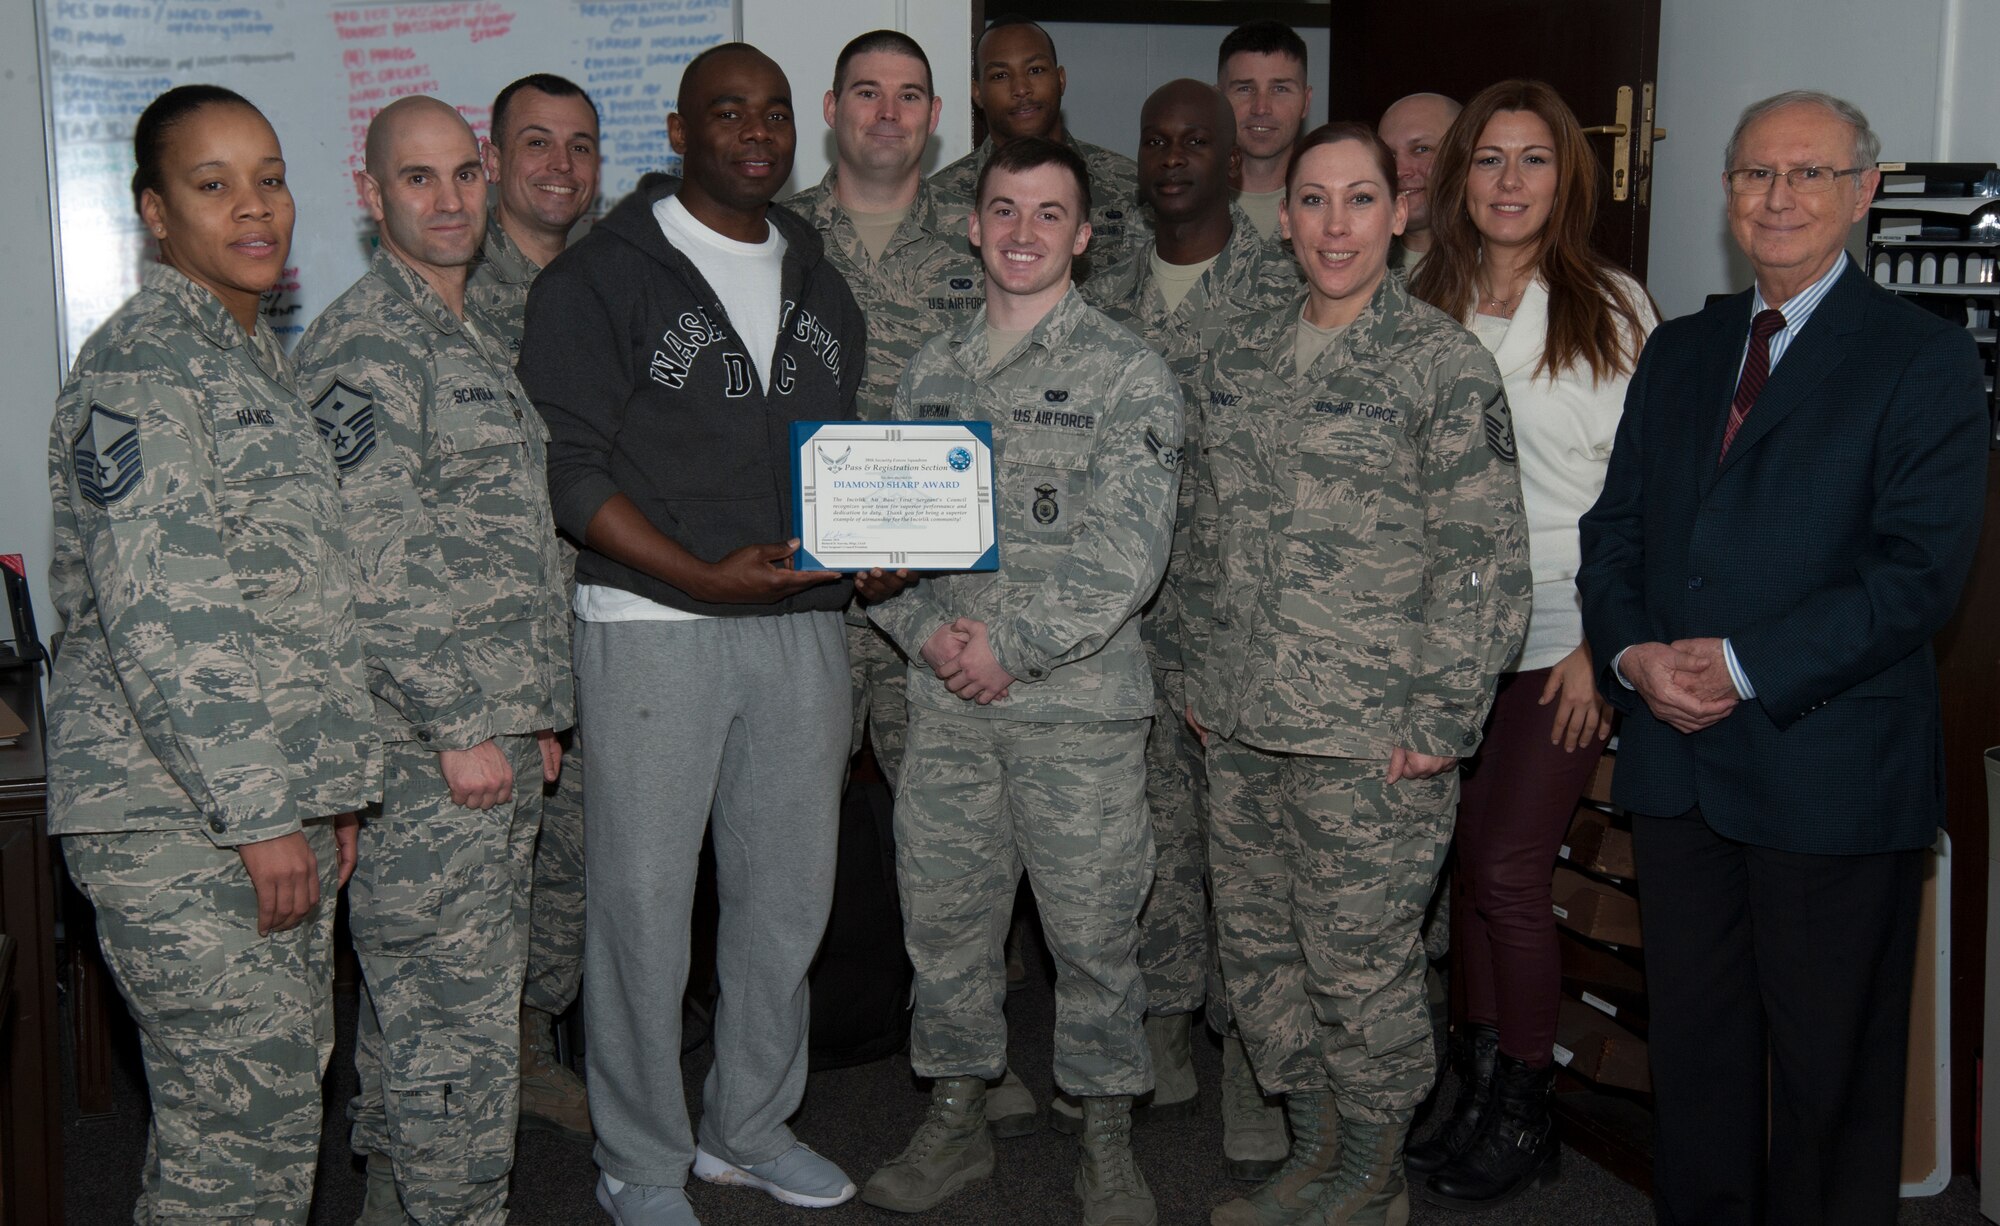 Members of the 39th Security Forces Squadron Pass and Registration pose with first sergeants after receiving the Diamond Sharp award Feb. 9, 2016, on Incirlik Air Base, Turkey. The first sergeant council recognizes individuals and teams for their superior performance and dedication to the mission. (U.S. Air Force photo by Airman 1st Class Daniel Lile/Released)